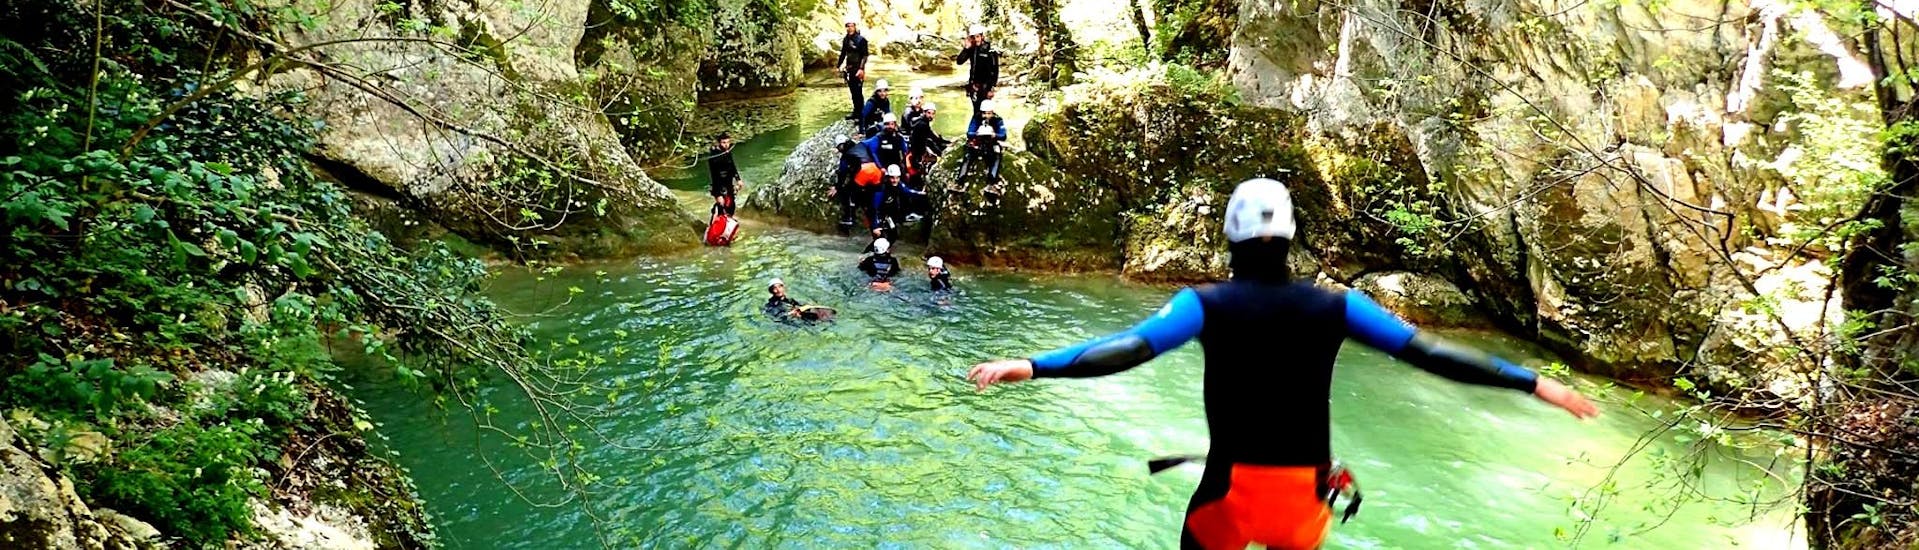 Classic Canyoning in the Aniene in Subiaco.